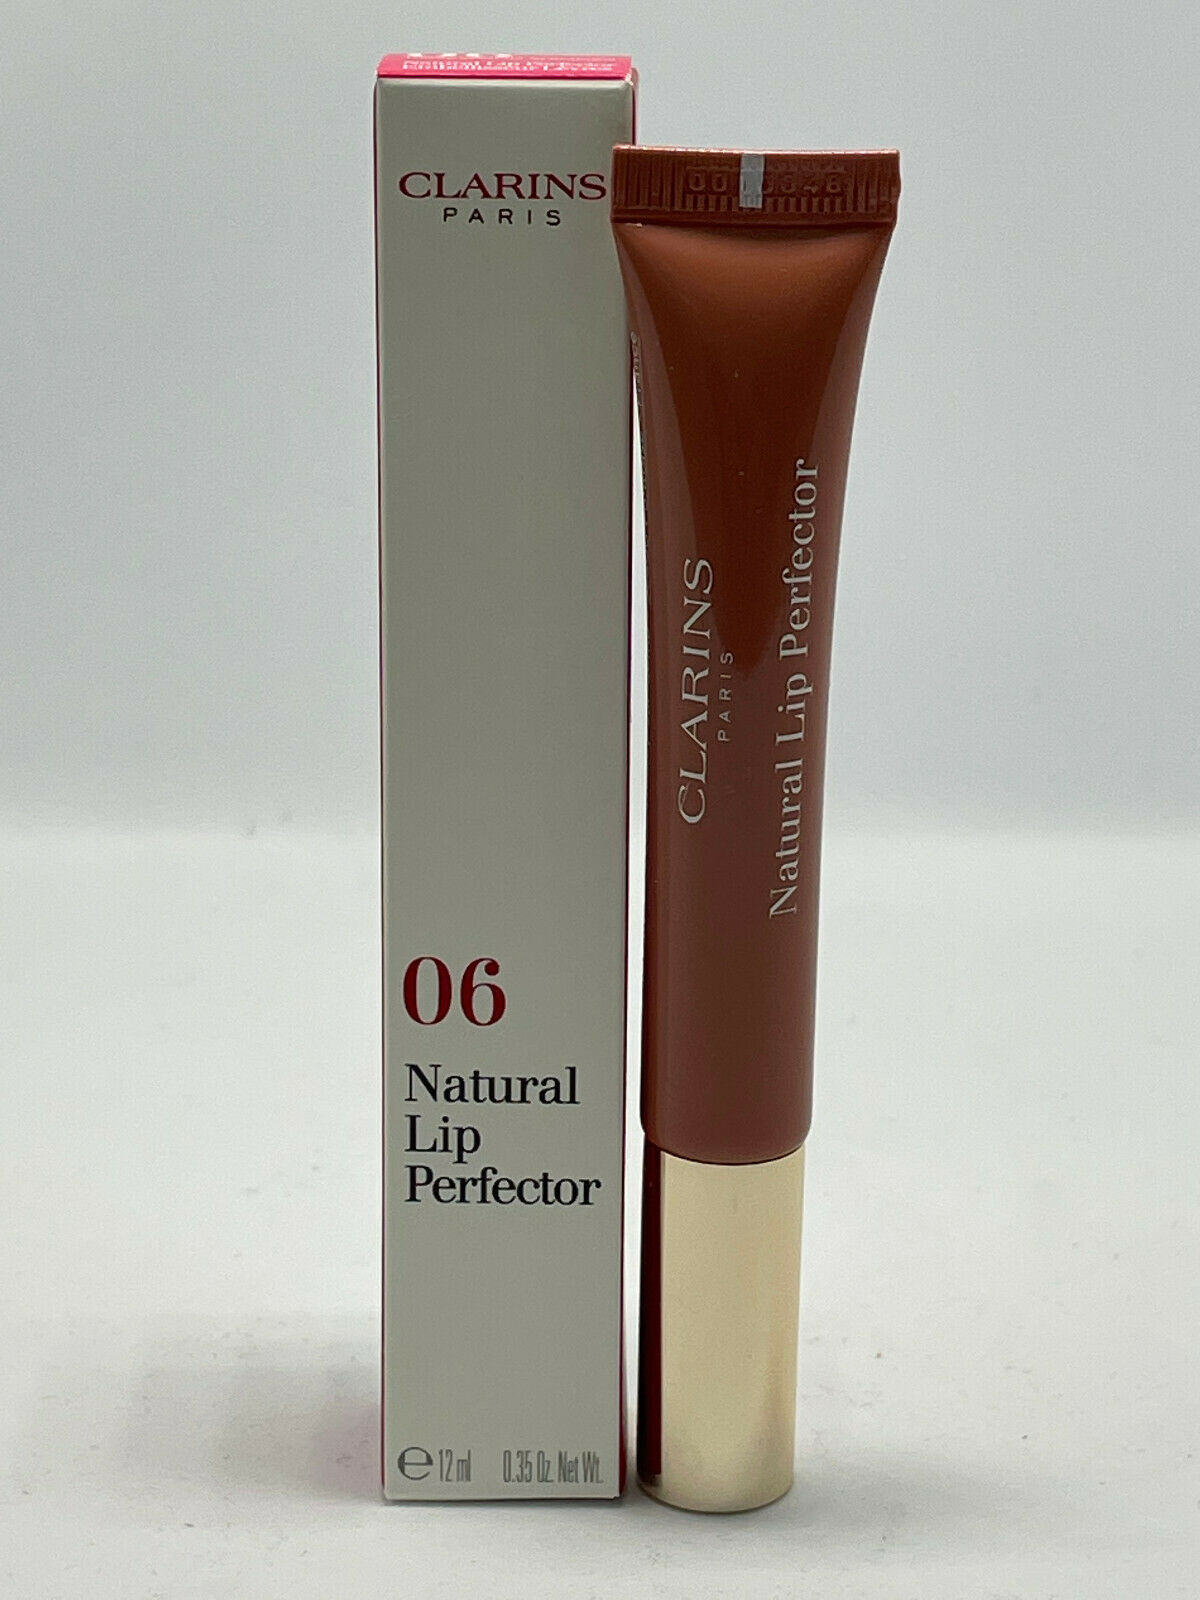 NEW CLARINS NATURAL LIP PERFECTOR # 06 ROSEWOOD SHIMMER 100% AUTHENTIC - $15.79